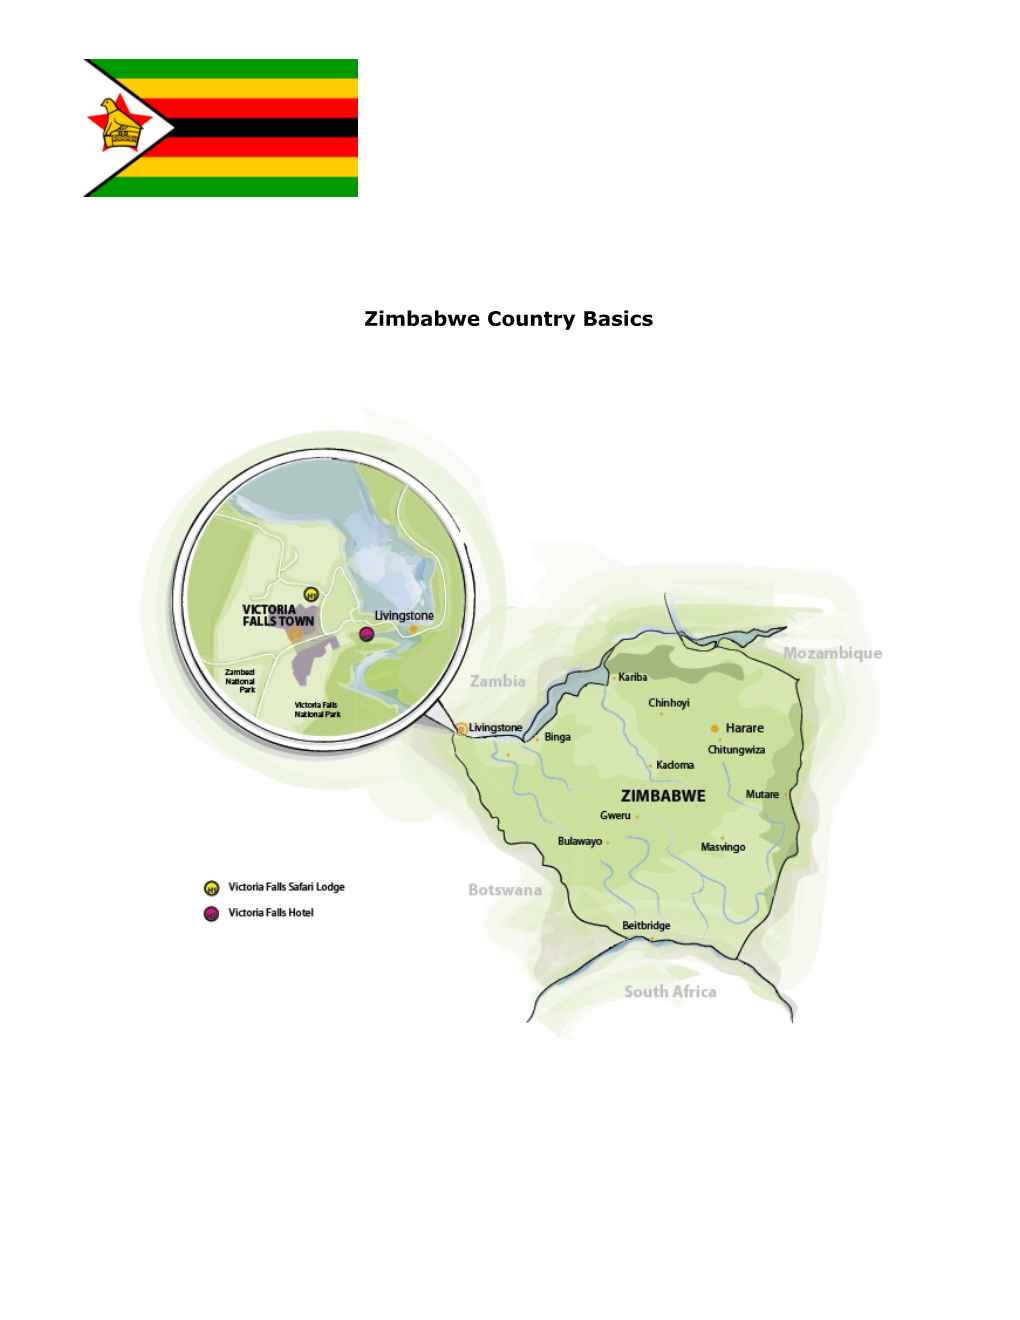 A Collaboration of Countries in the SADC Region Has Resulted in the Launch of the Kaza